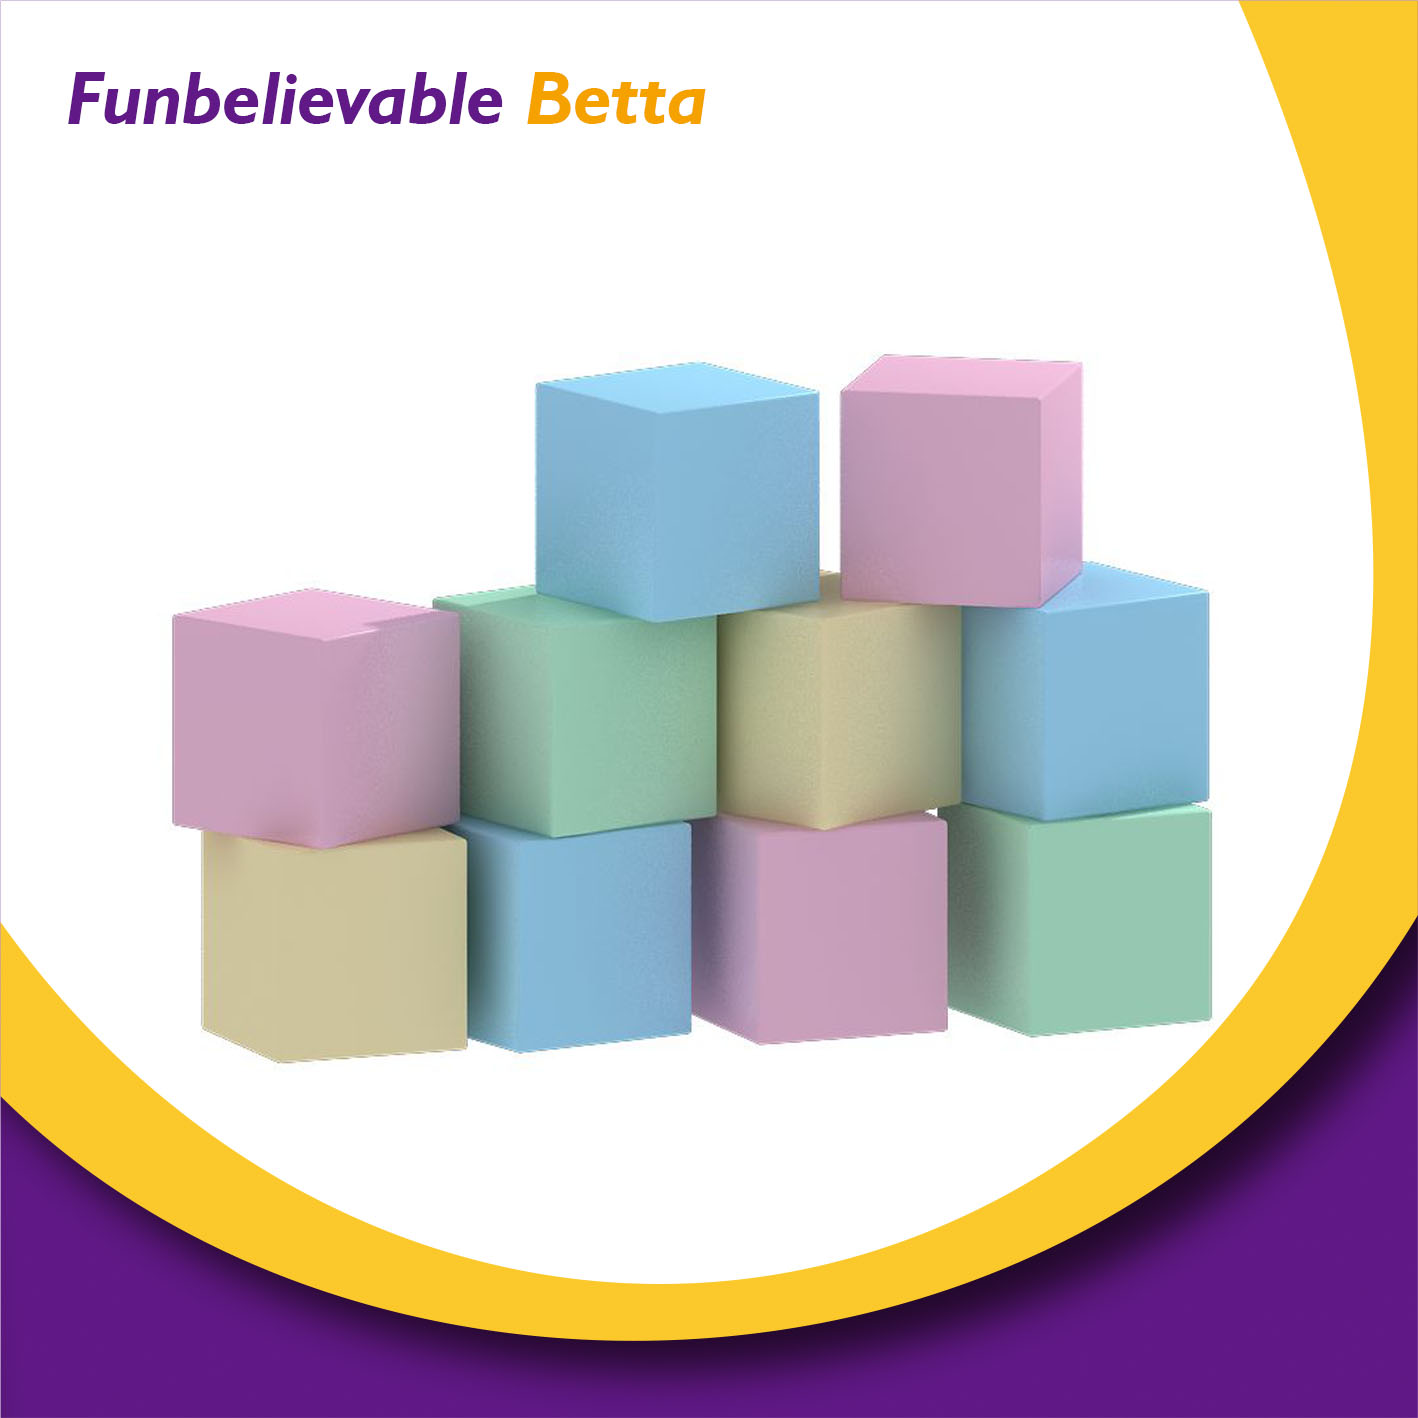 Bettaplay soft play party rental cubic all foam building blocks for kids